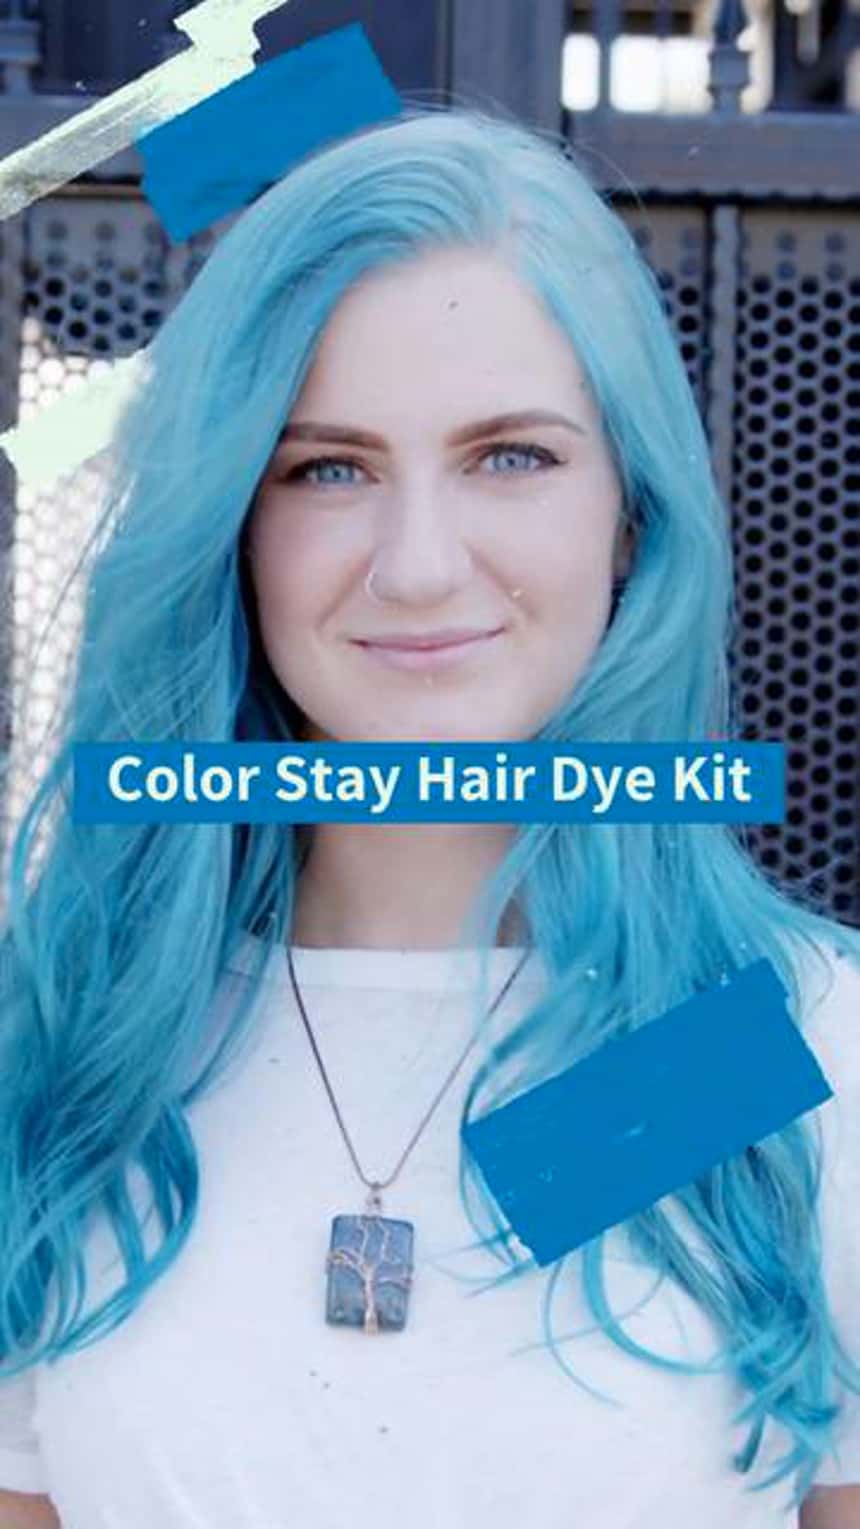 TikTok product demo of a person with blue hair. Text on image reads 